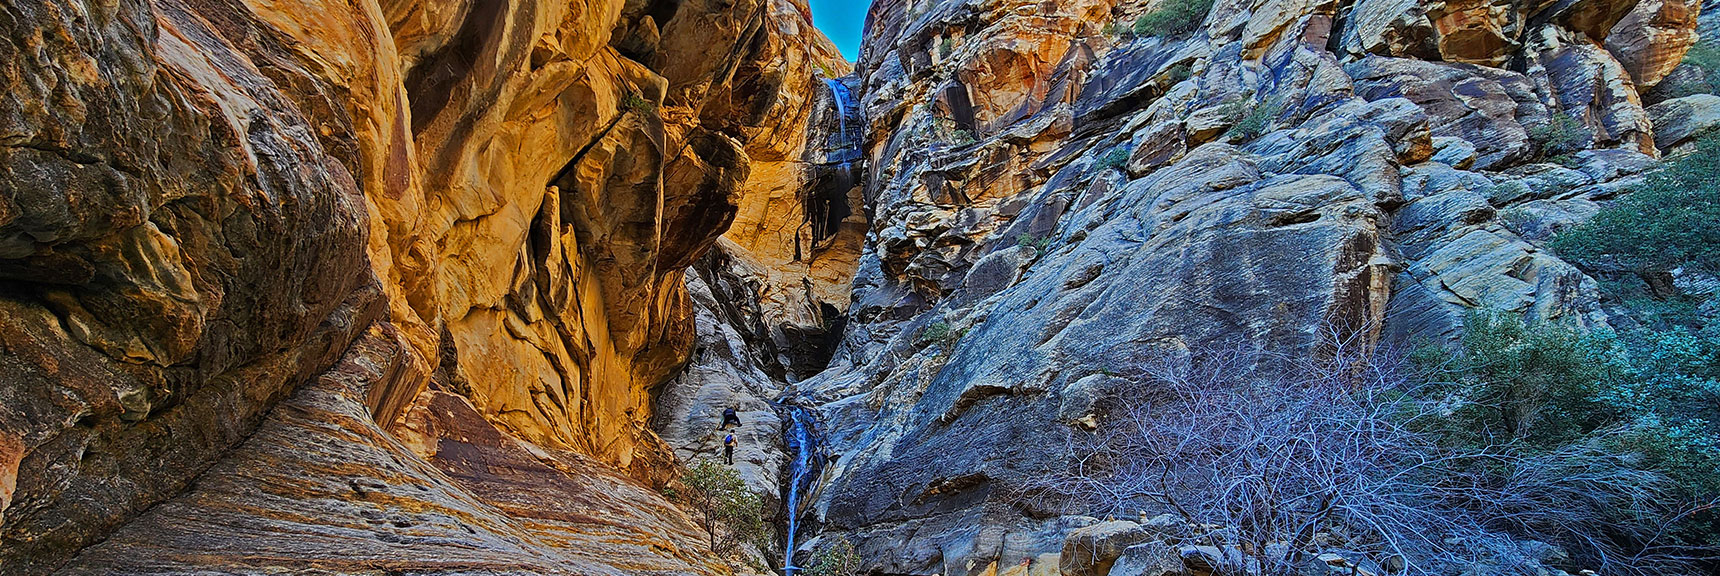 First View of Double Waterfall in the Upper Canyon. | Ice Box Canyon | Red Rock Canyon NCA, Nevada | Las Vegas Area Trails | David Smith